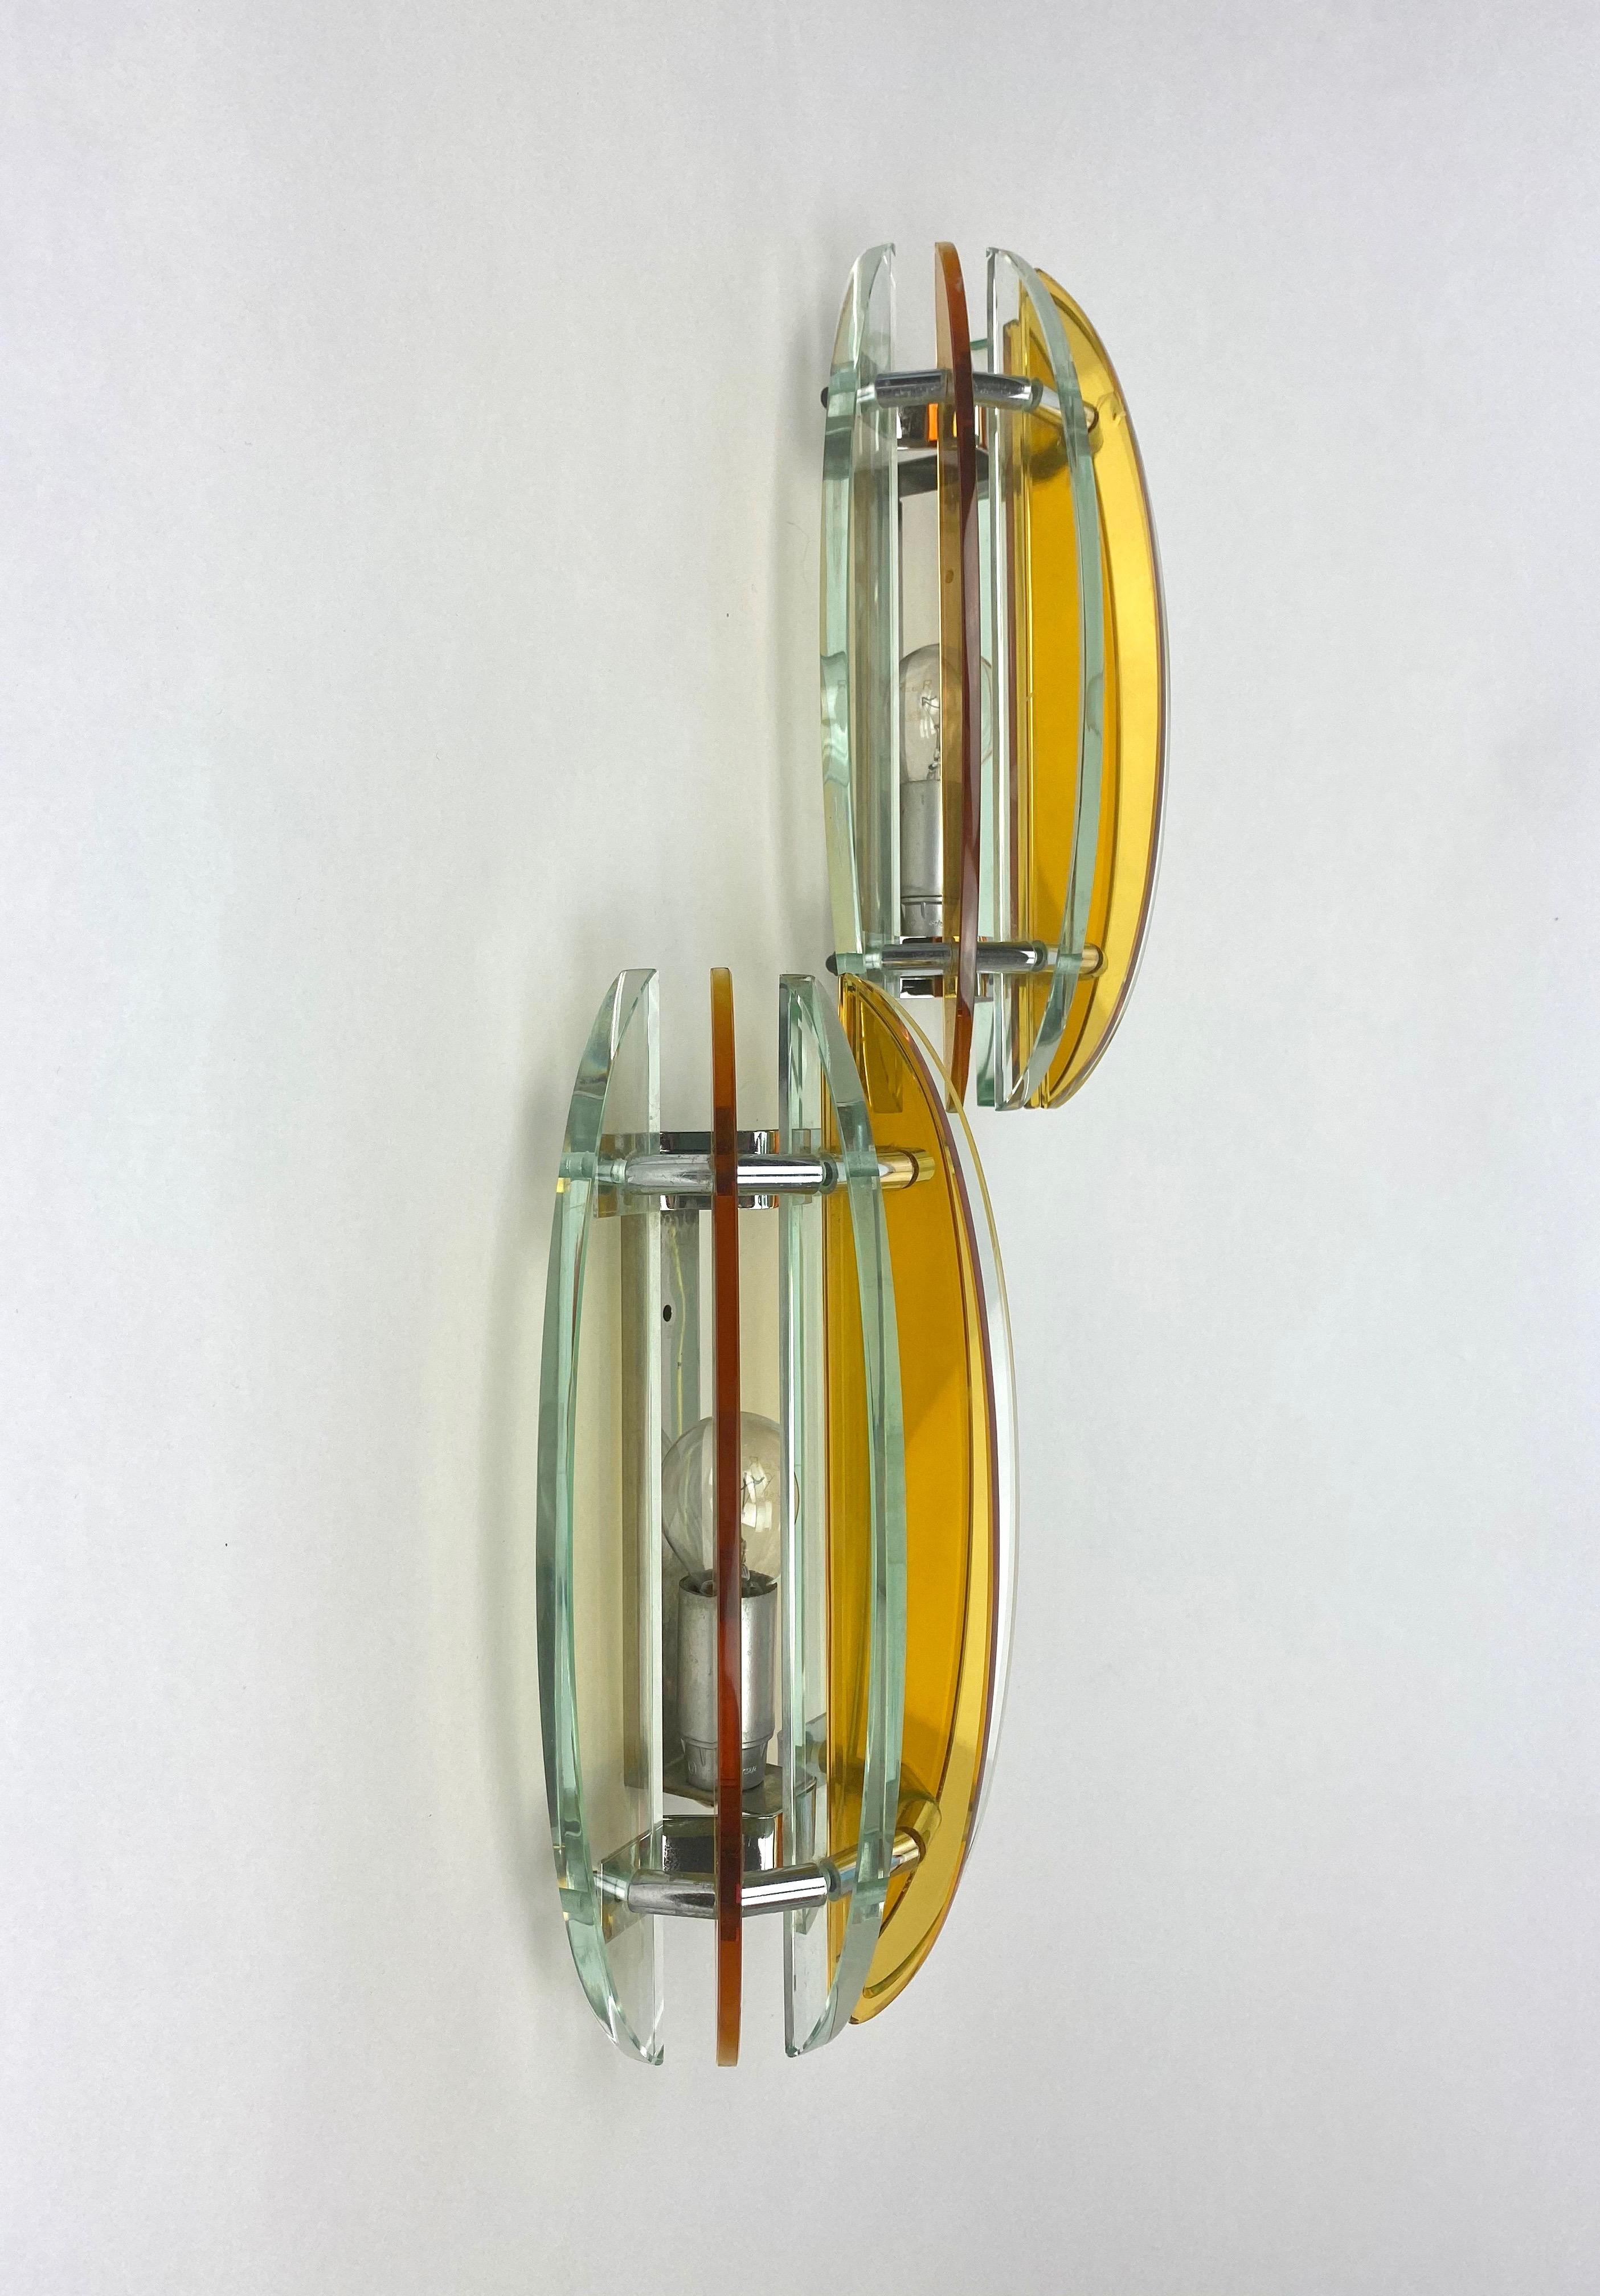 colored glass sconces